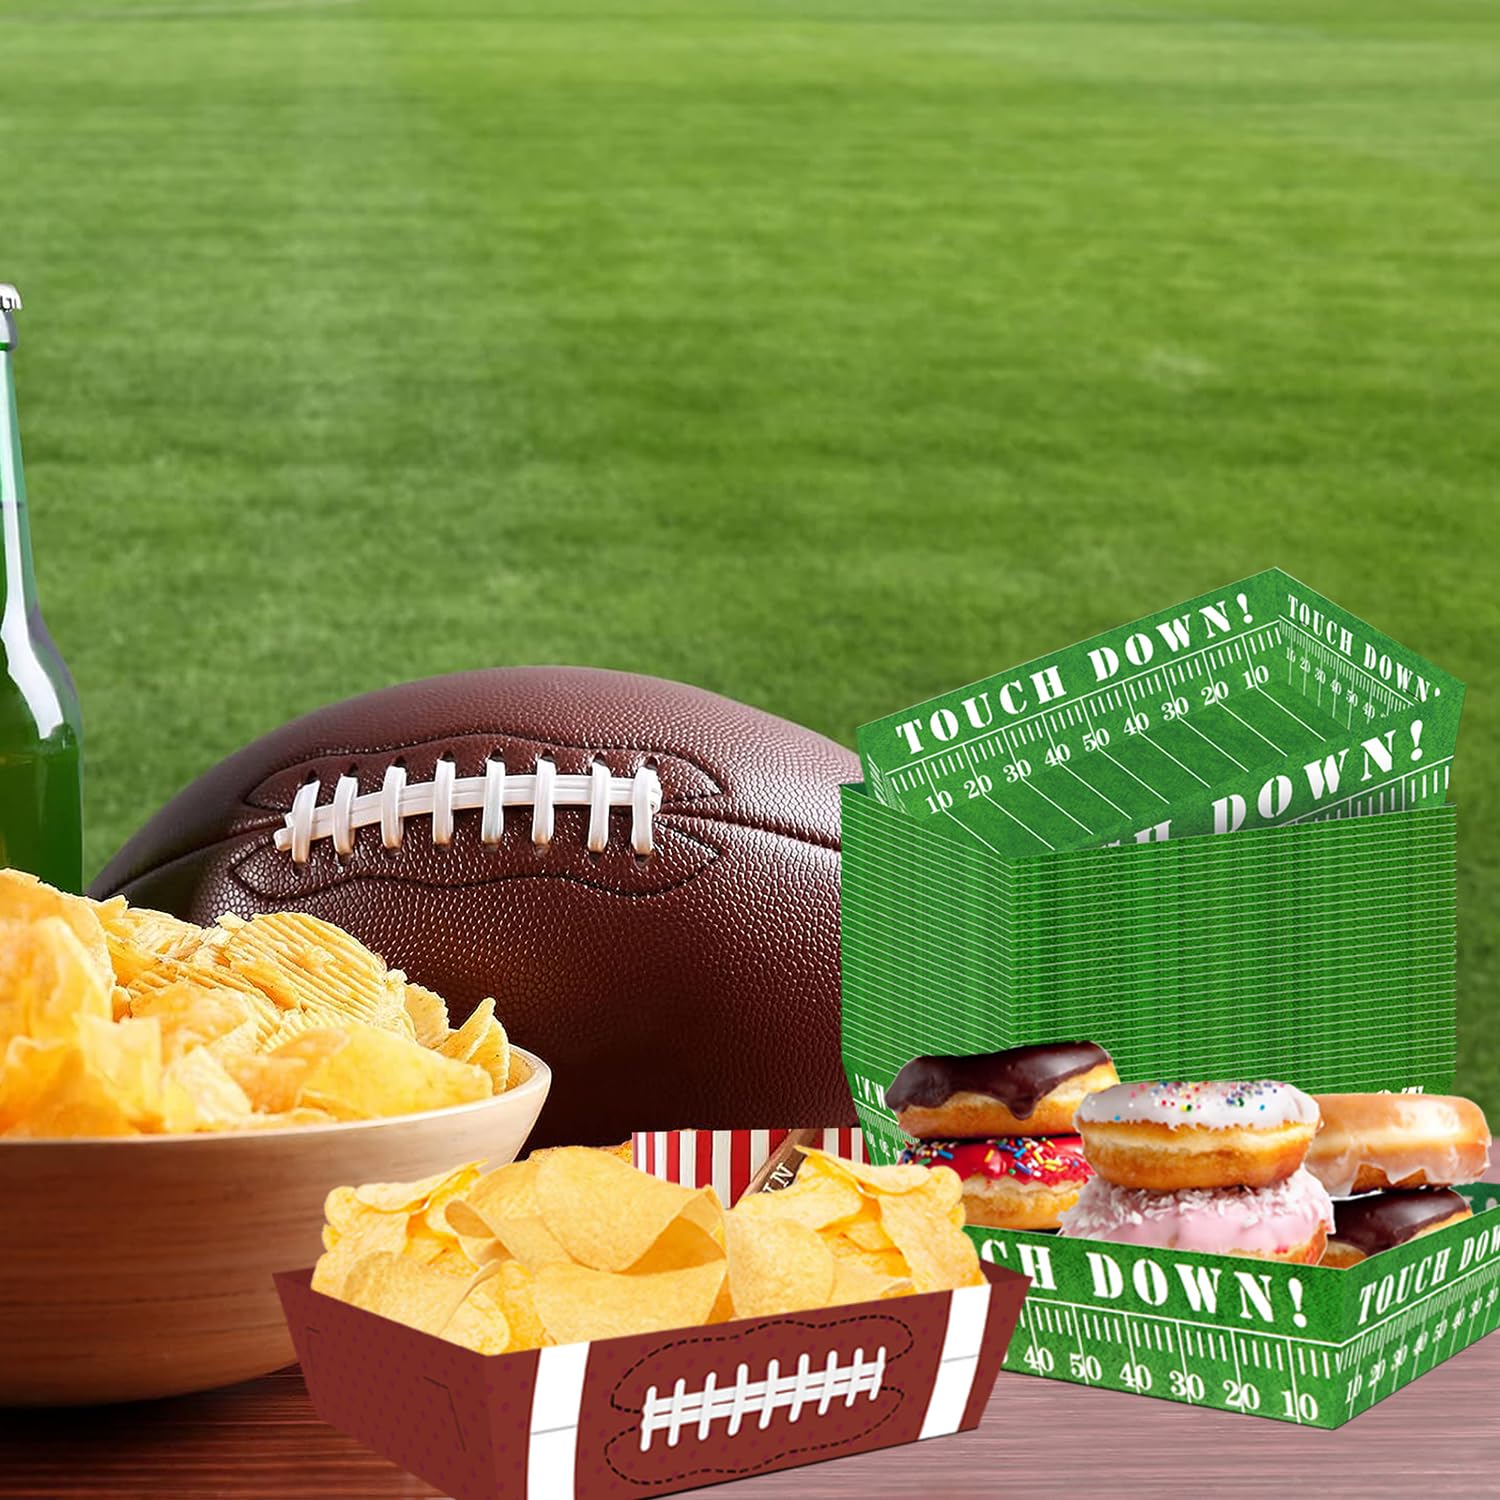 Football Party Decorations Football Party Supplies-50Pcs Football Party Favors Football Paper Food Tray Football Disposable Serving Boats for Football Birthday Party Superbowl Party Decorations